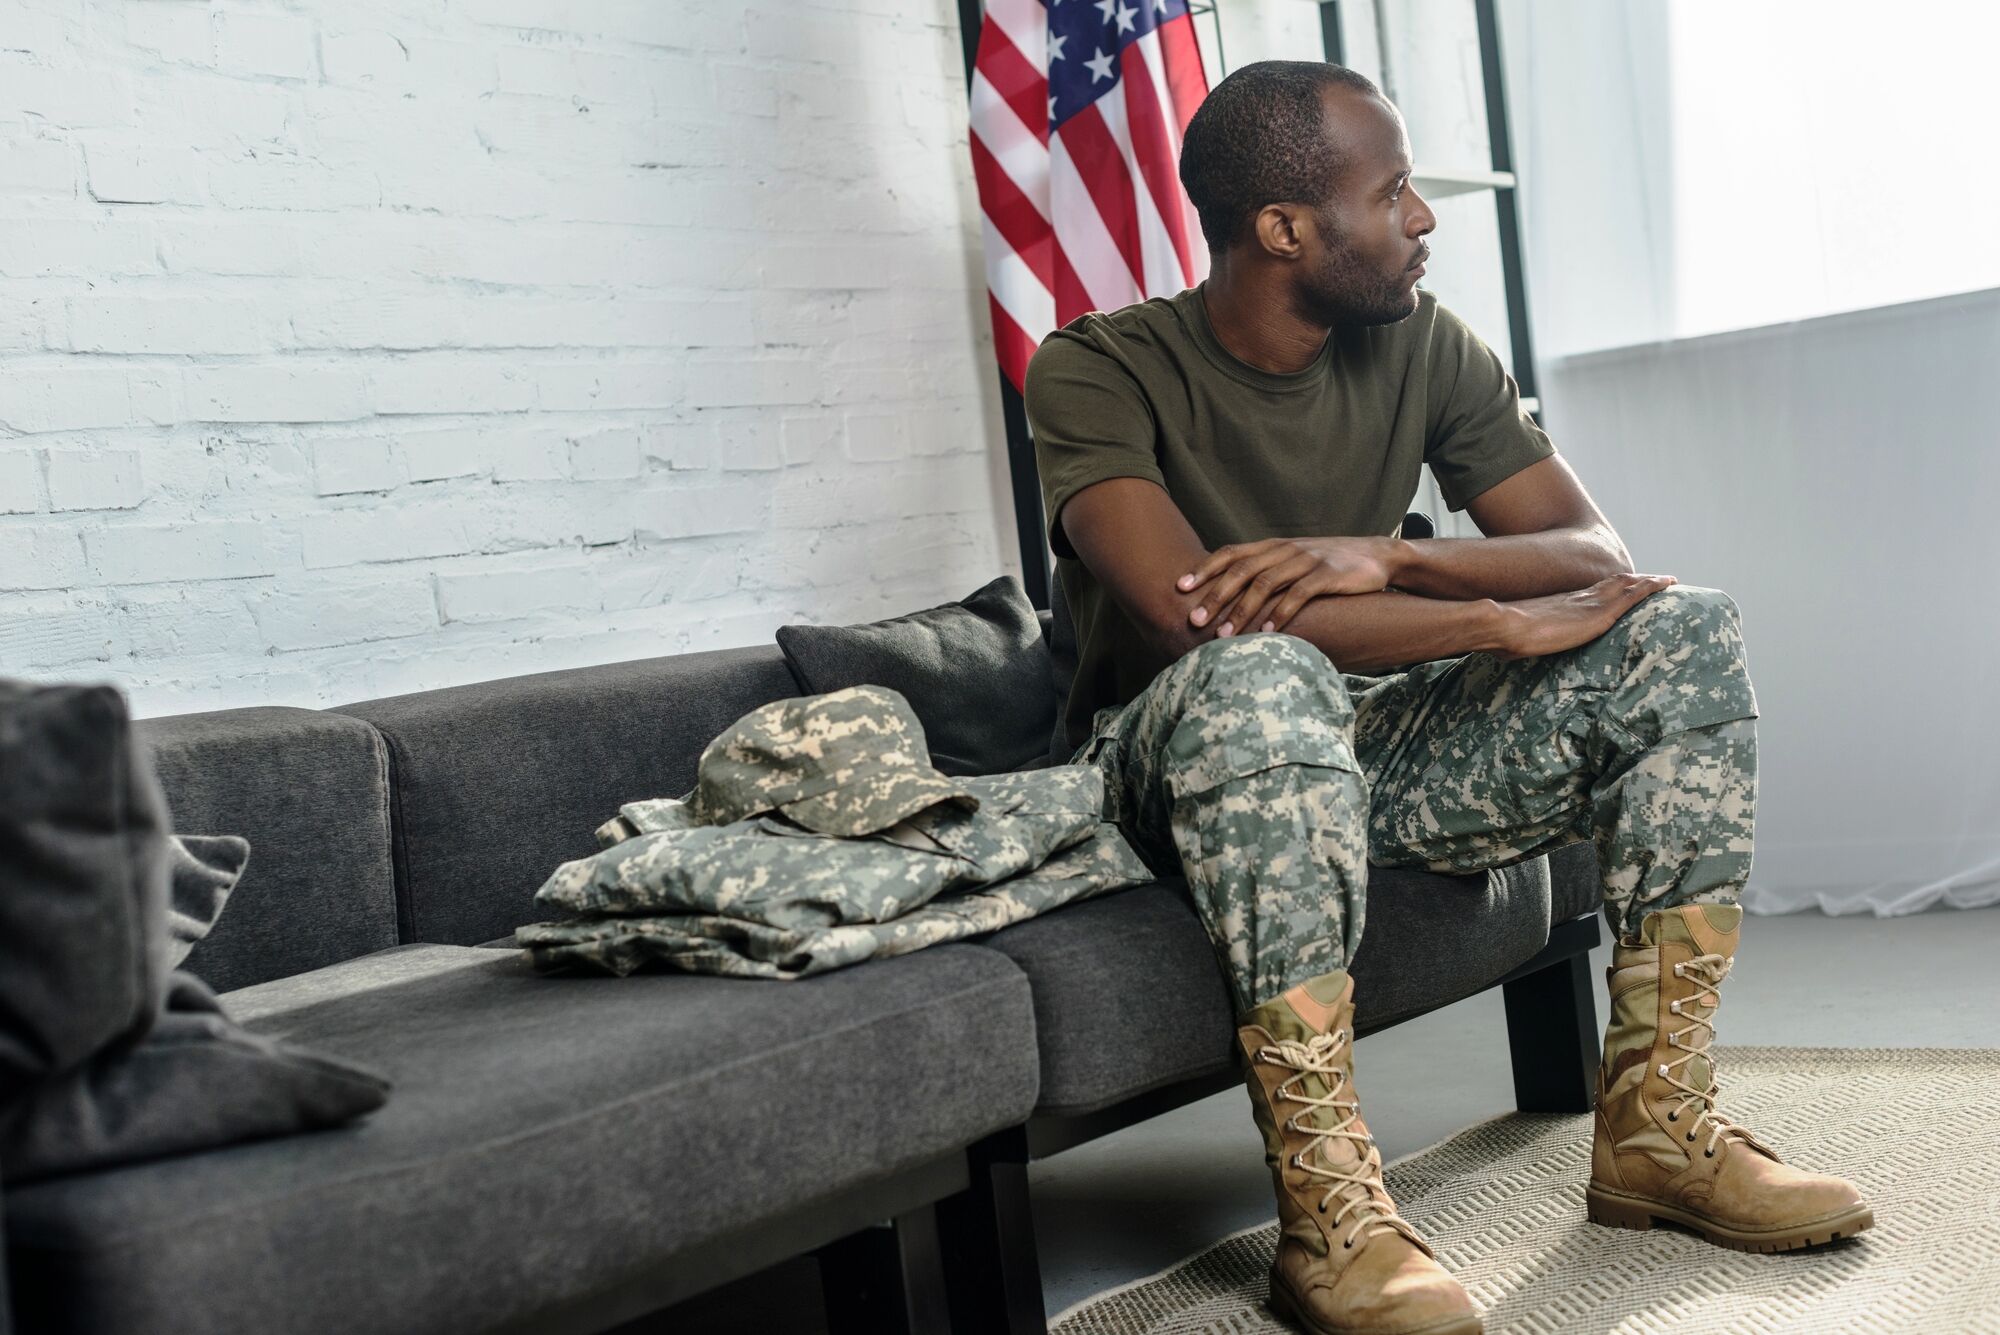 Carelon for behavioral health services is an insurance provider that covers veteran and first responder patients at Transformations Treatment Center, an in-network treatment center for addiction